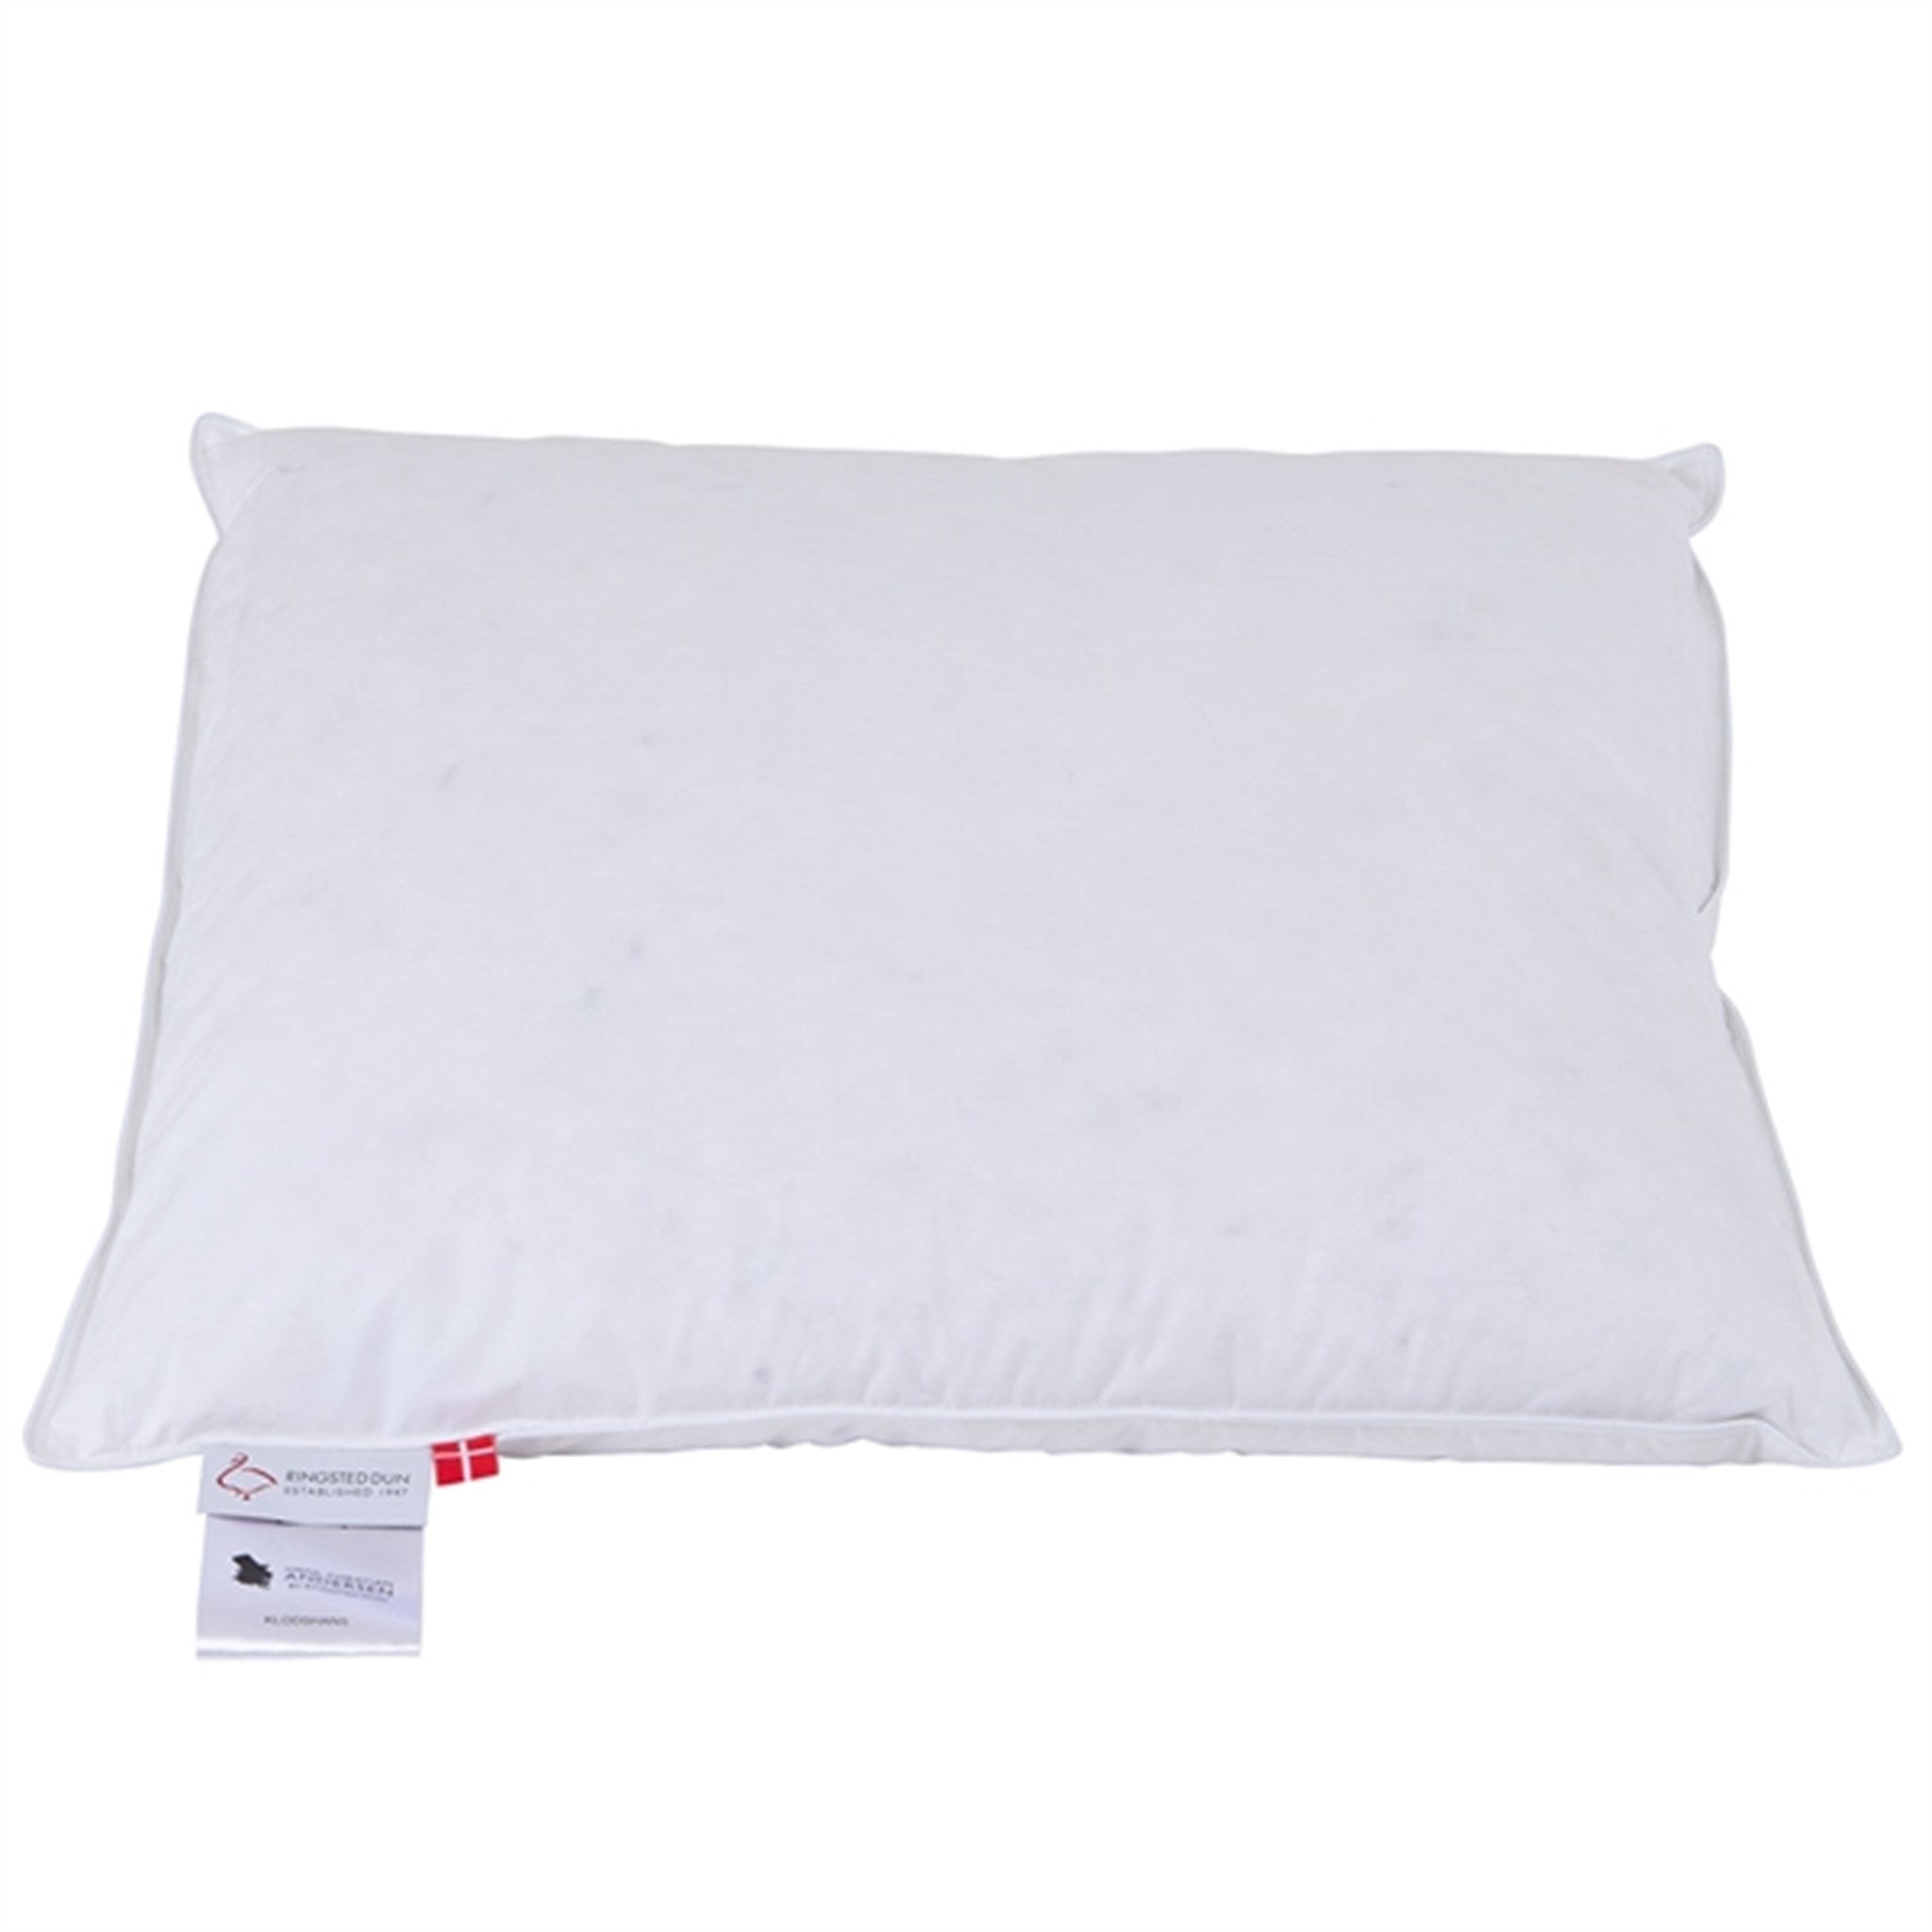 RINGSTED DUN Klodshans Adult Pillow Low